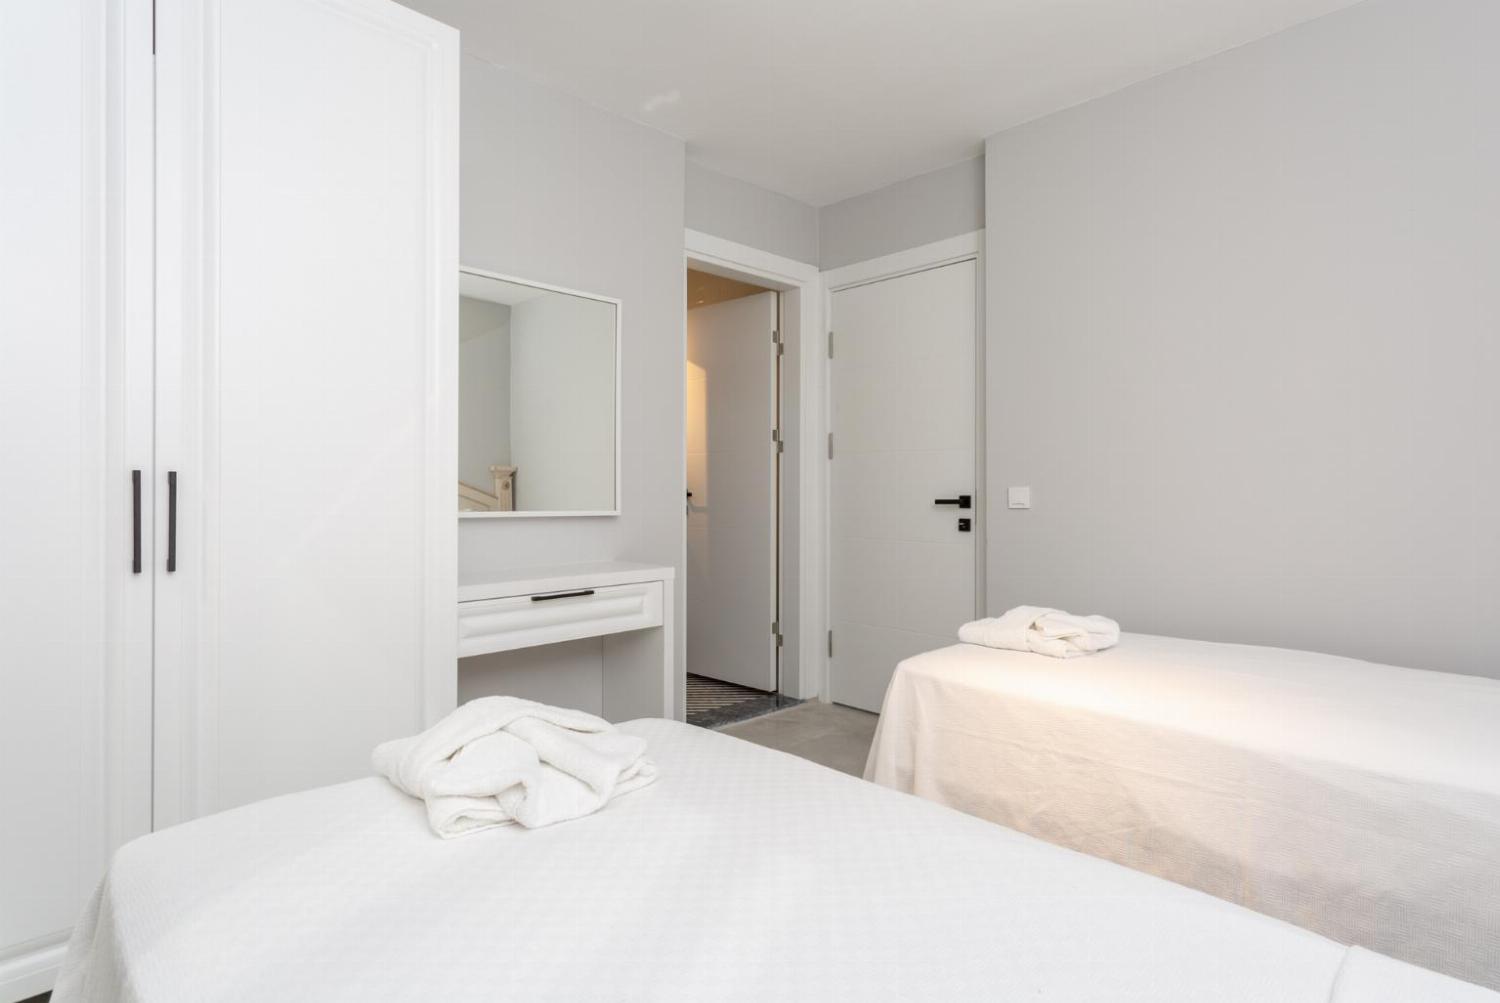 T win bedroom, with single beds, en suite bathroom, A/C and balcony access